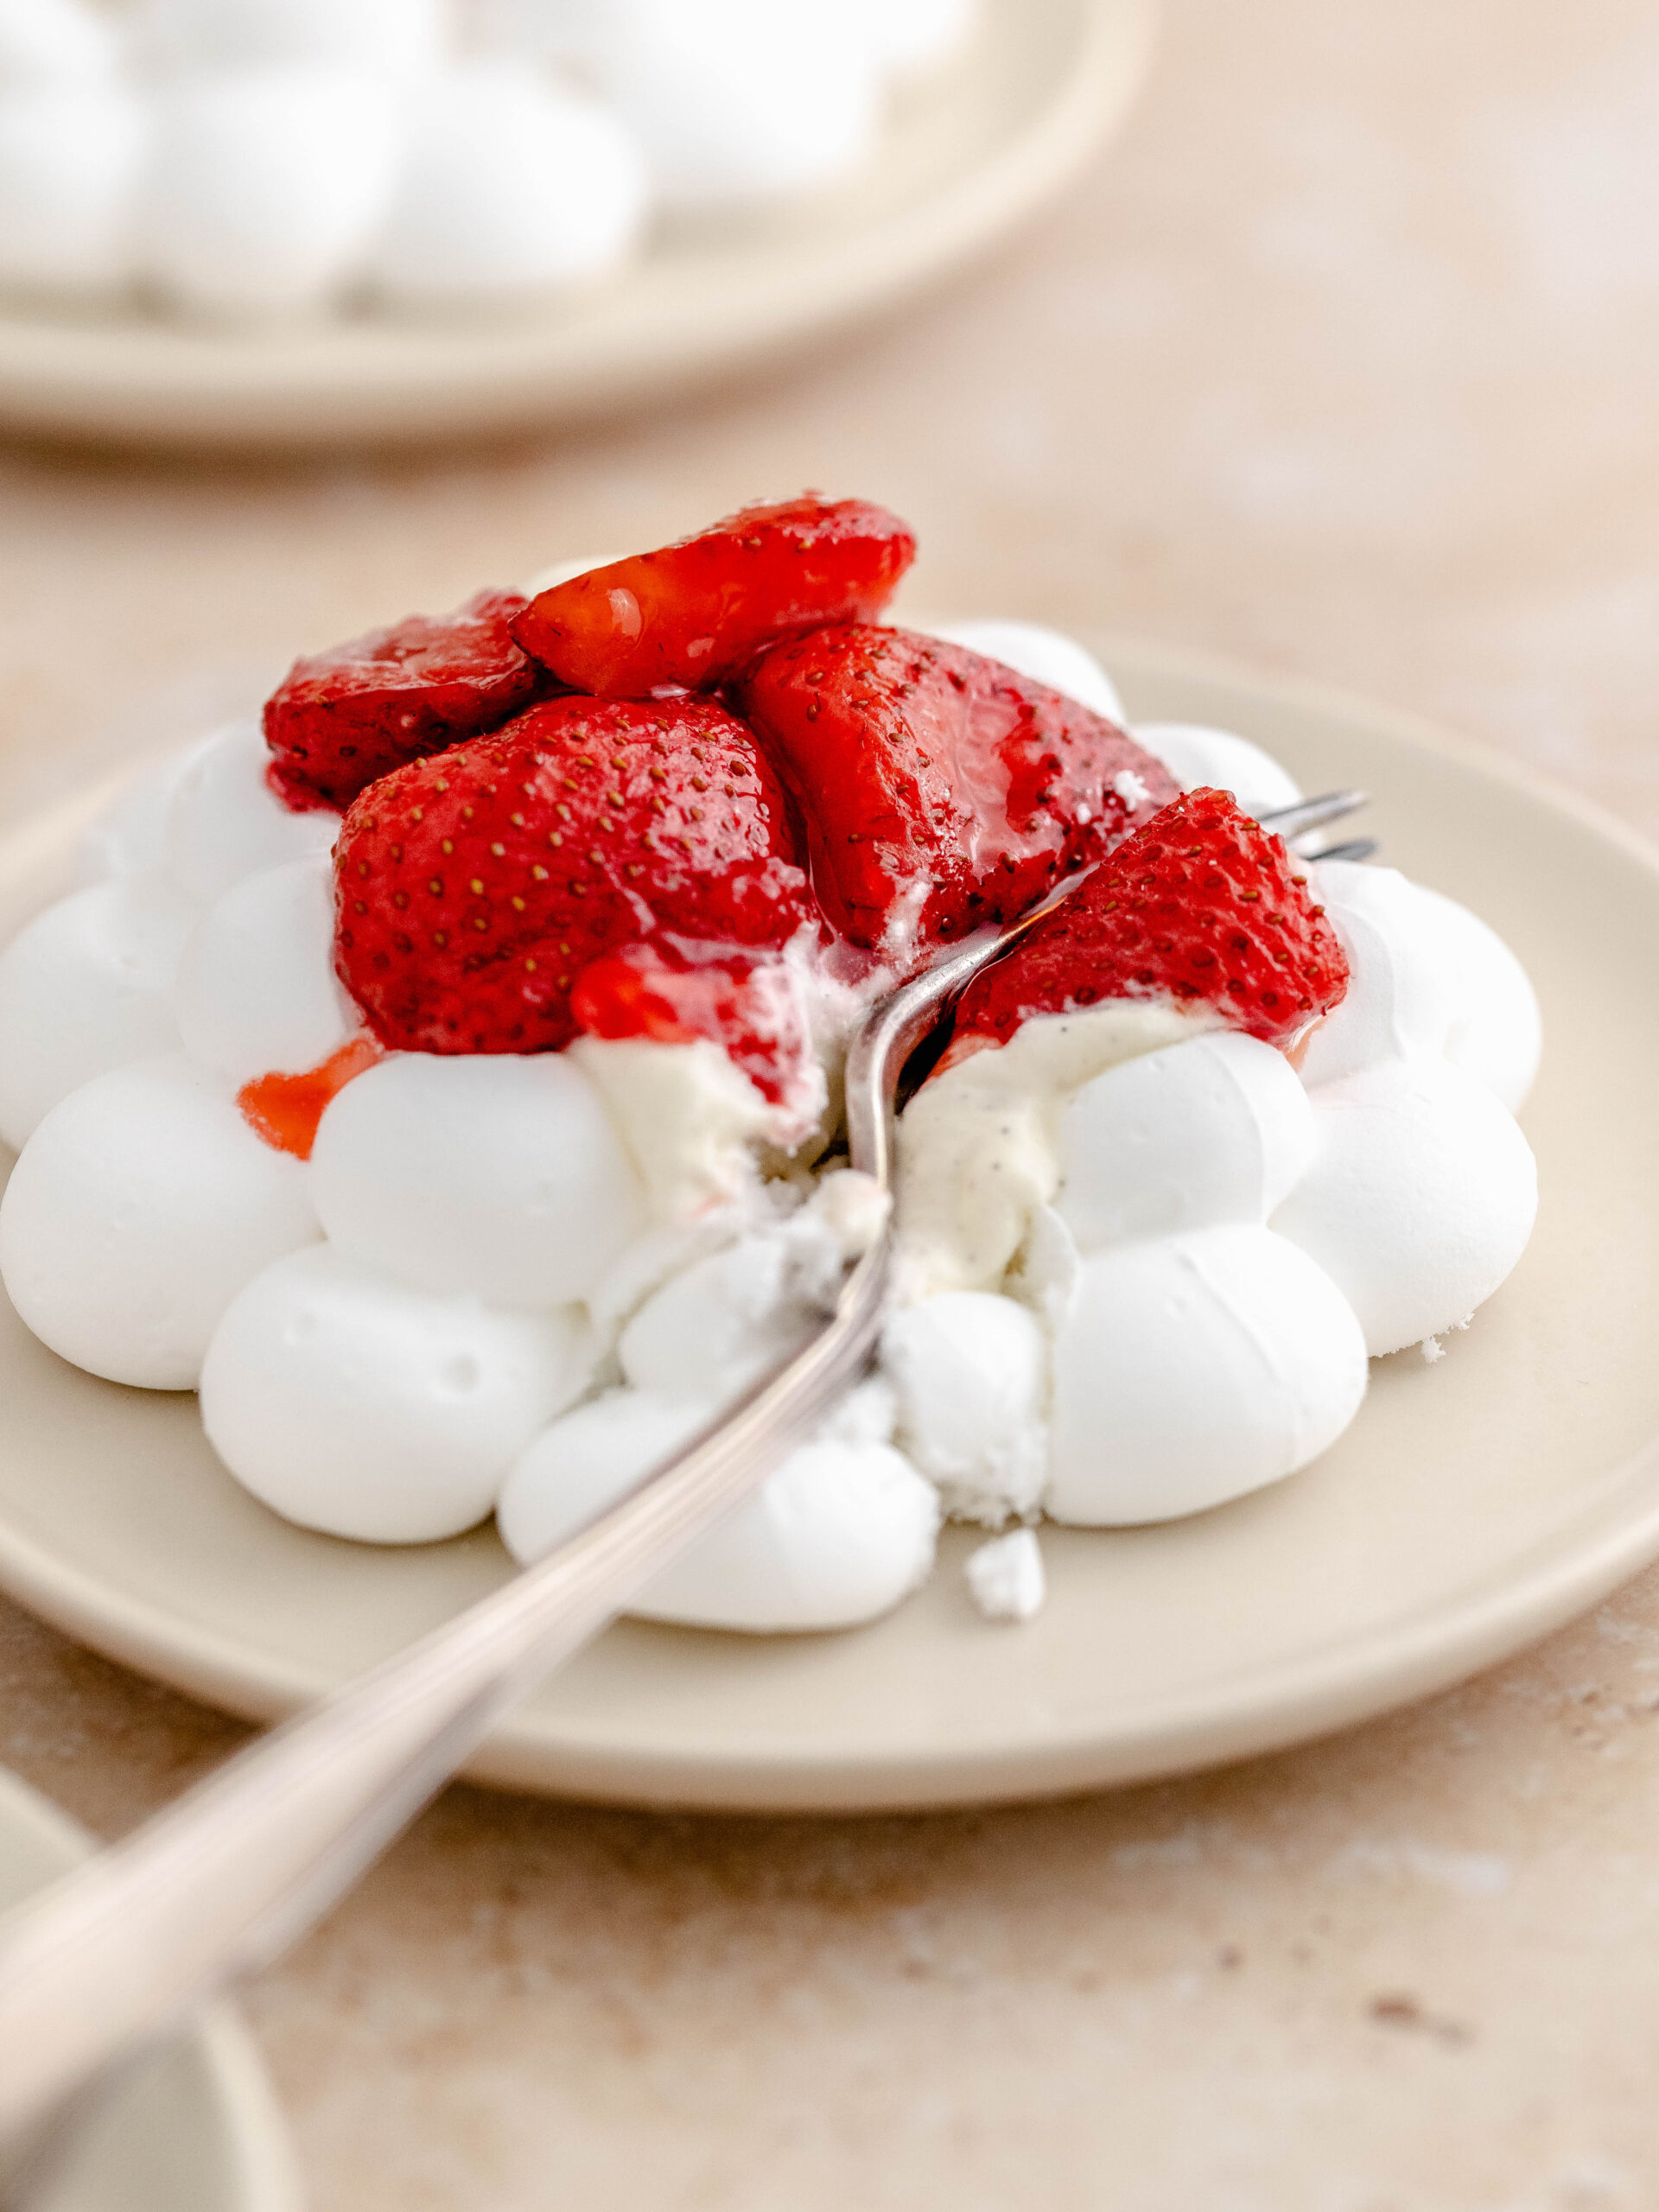 A baked strawberry meringue nest on a plate.